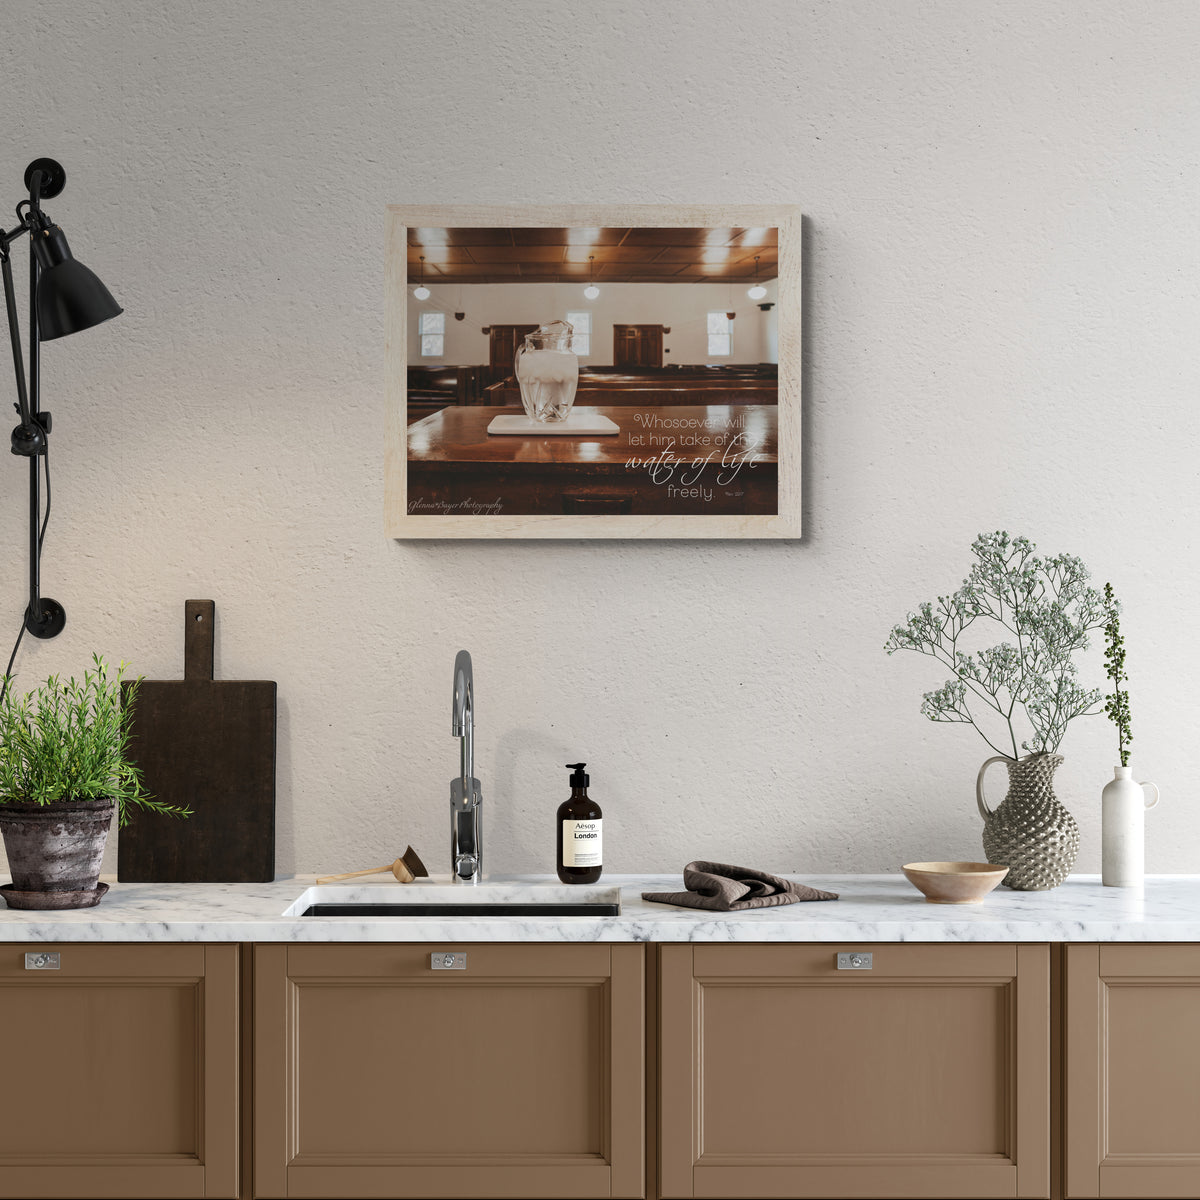 print displayed on wall in kitchen